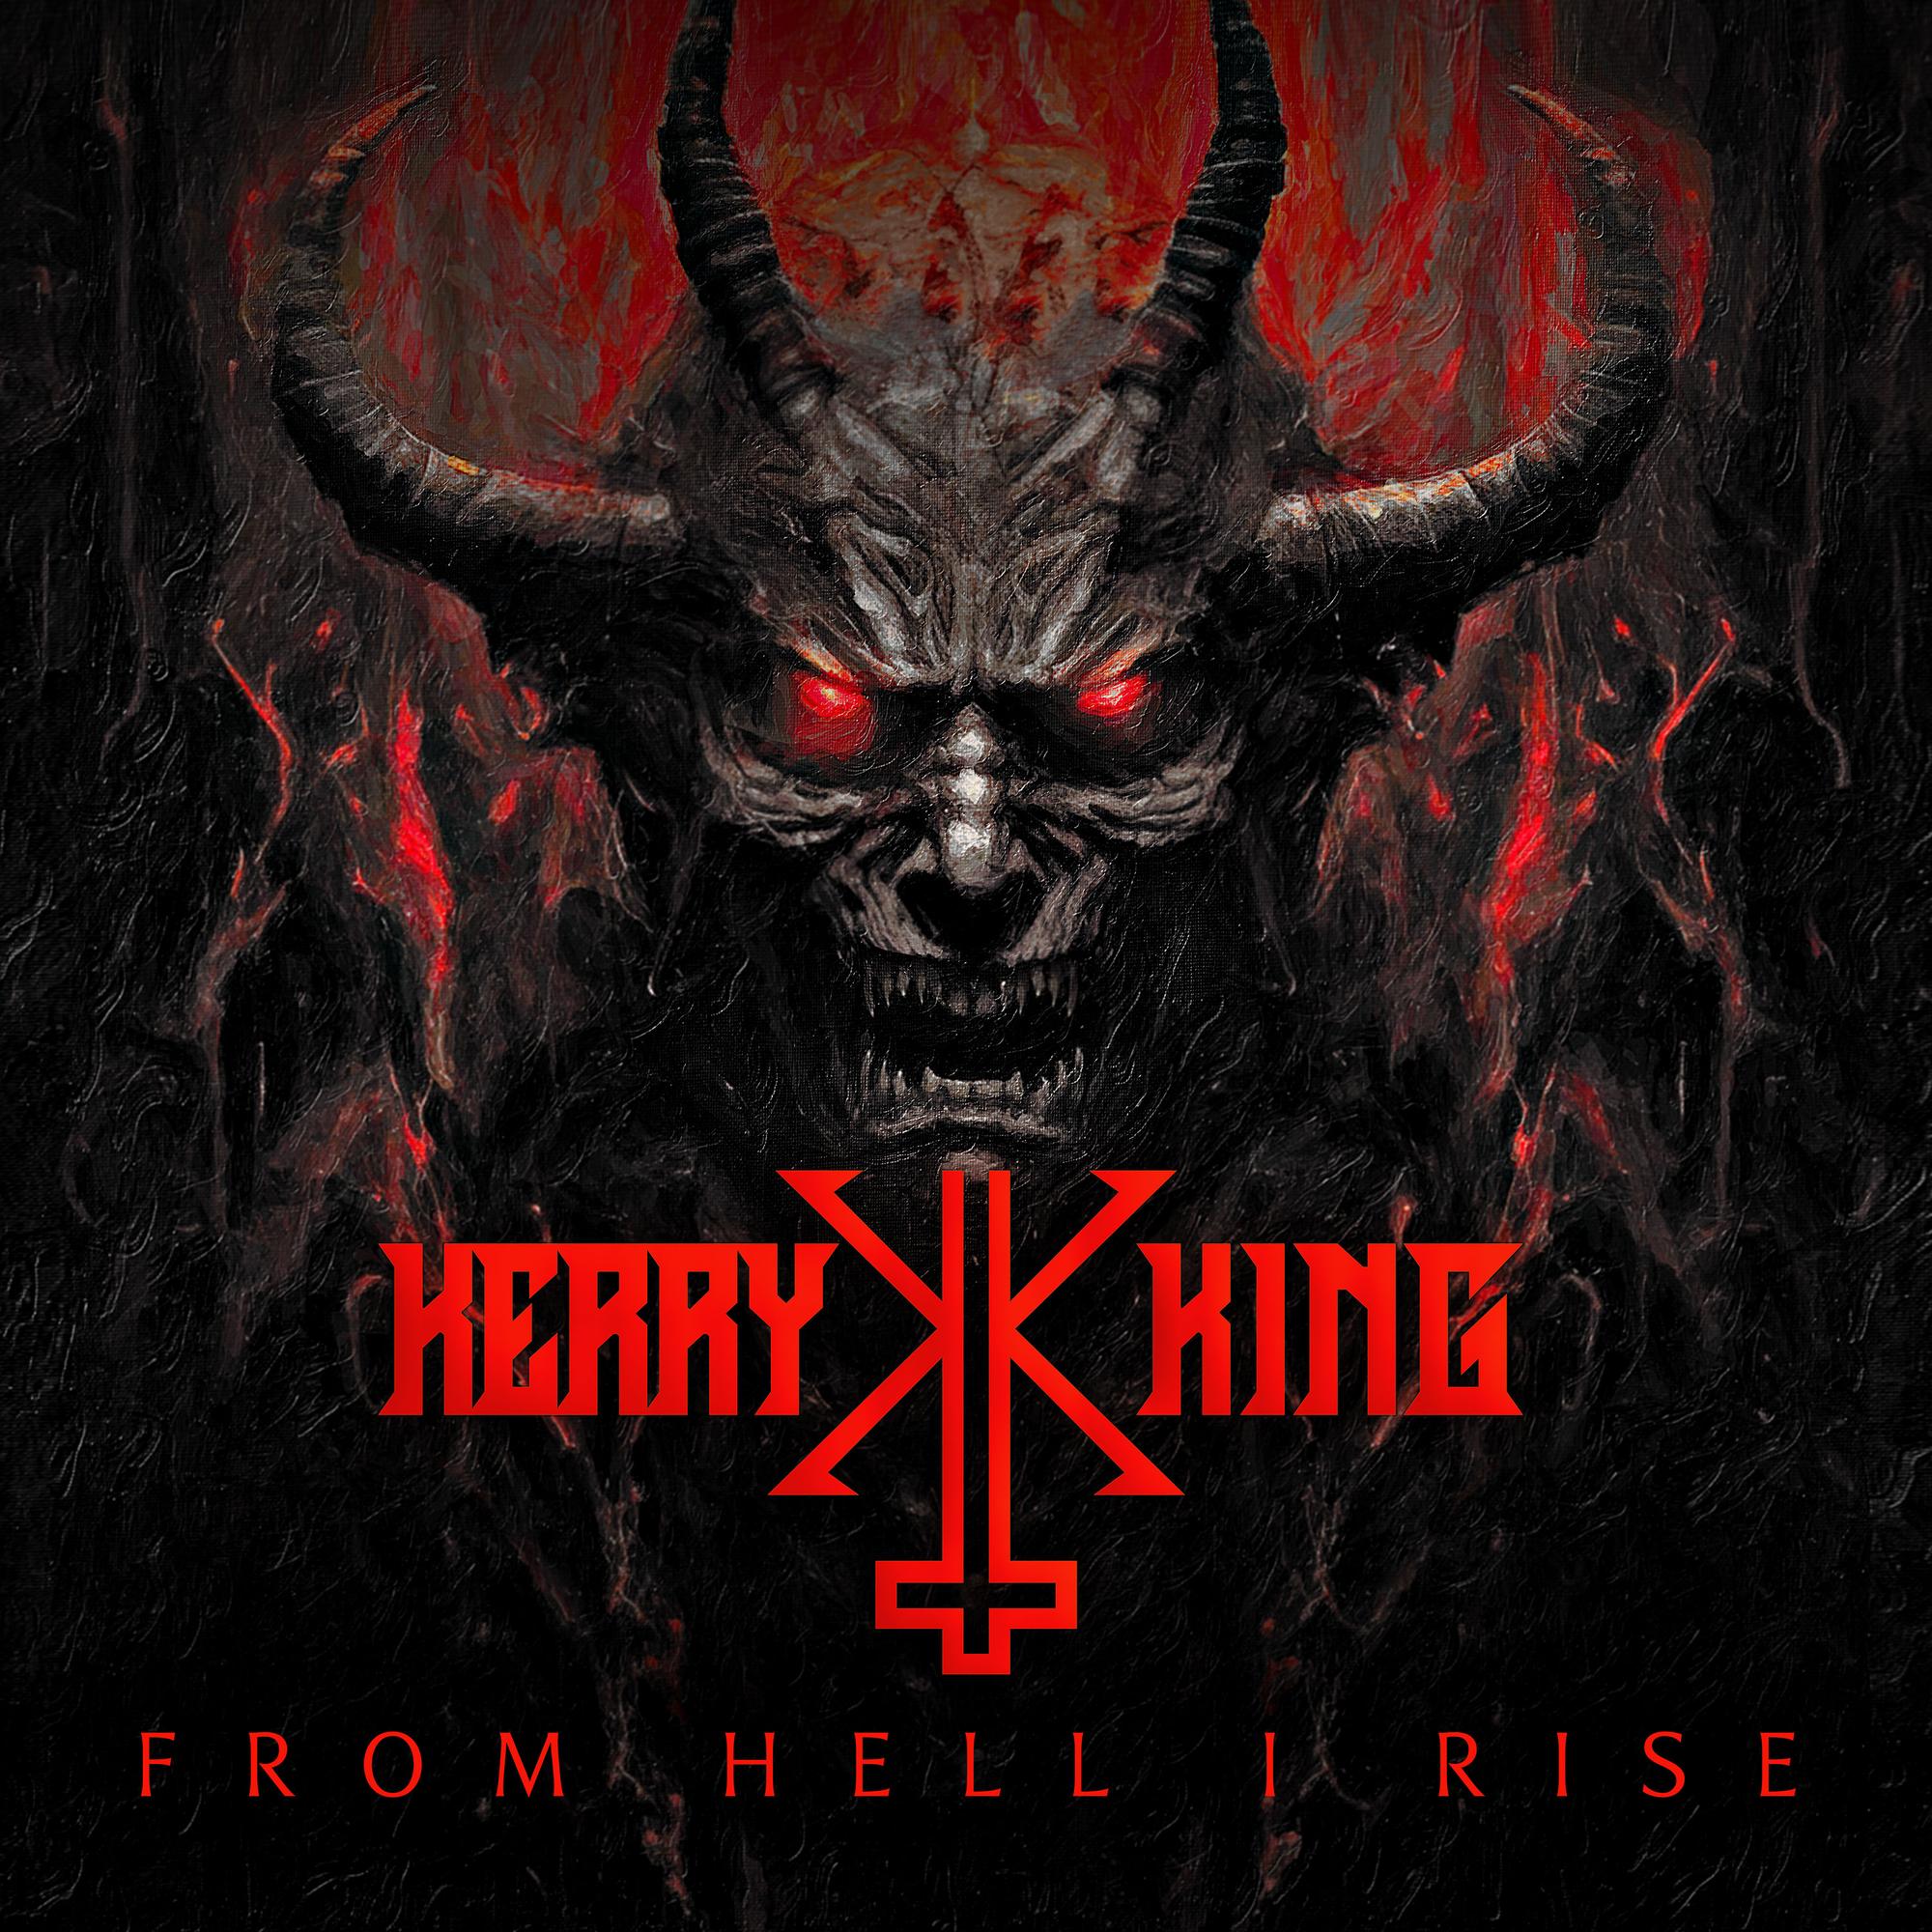 Kerry King "From Hell I Rise" Red / Orange Marble Vinyl - PRE-ORDER